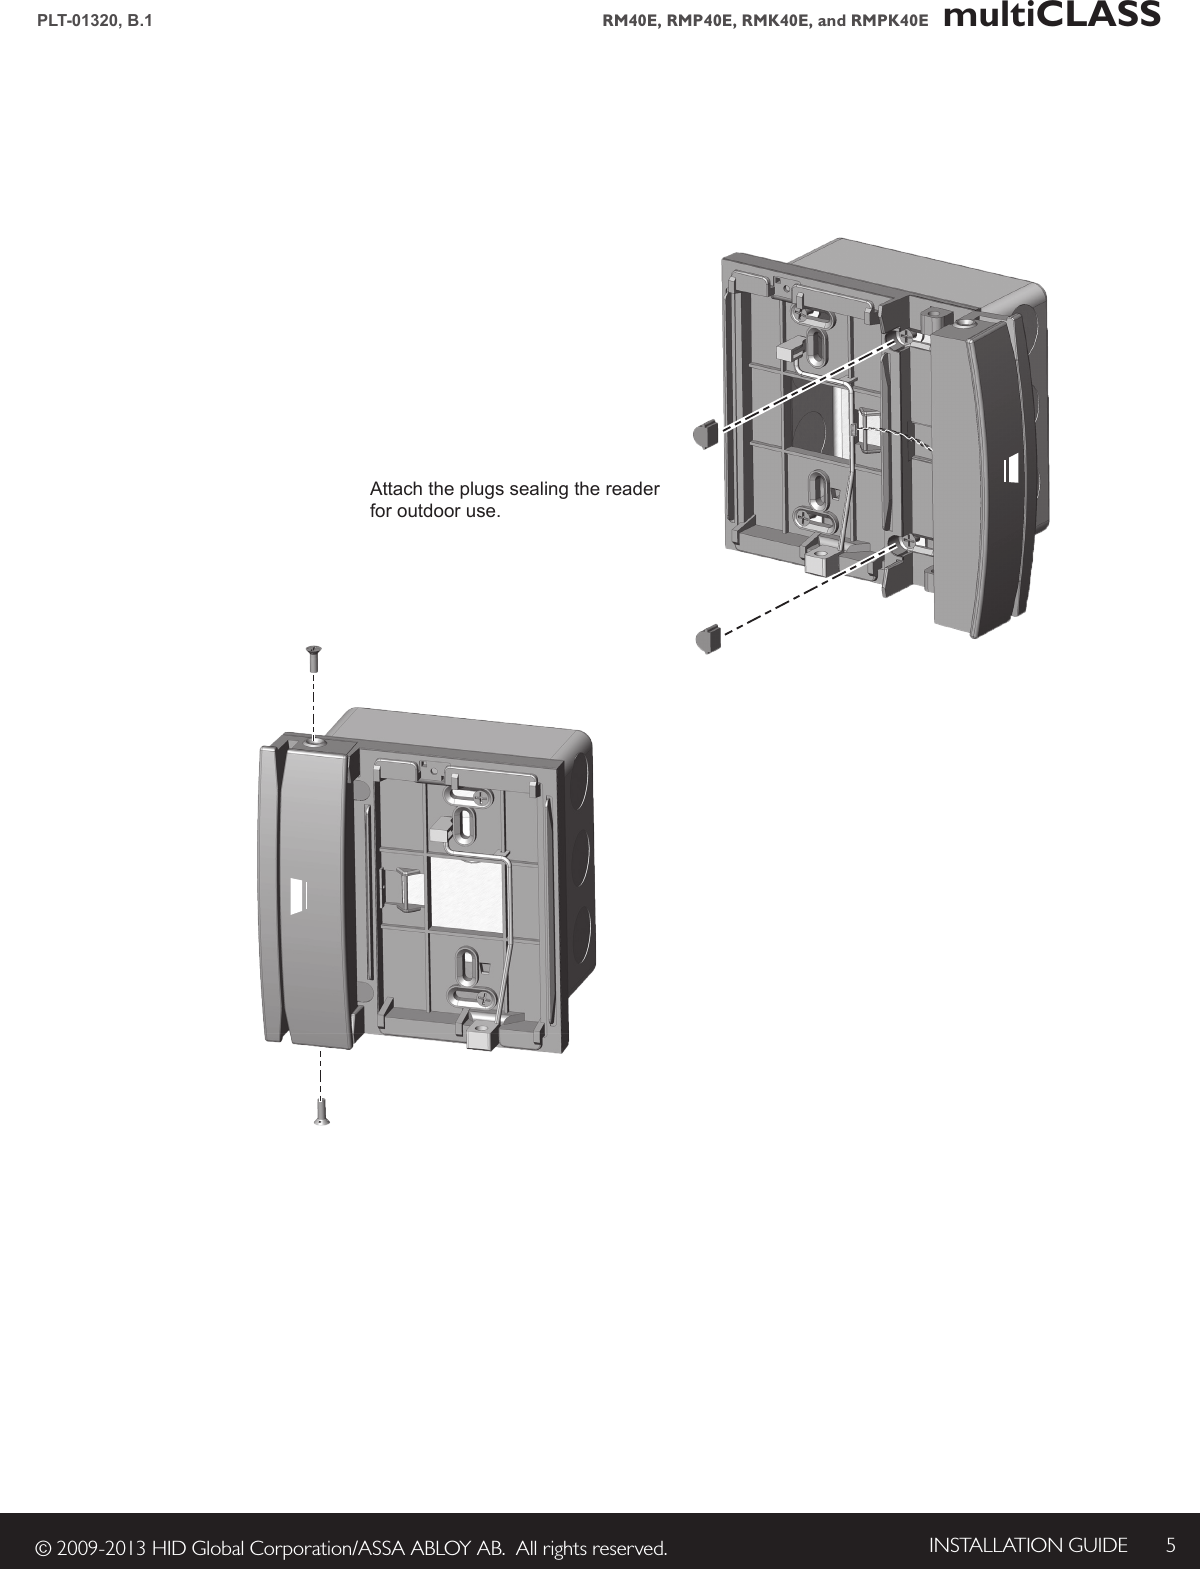 INSTALLATION GUIDE 5© 2009-2013 HID Global Corporation/ASSA ABLOY AB.  All rights reserved.PLT-01320, B.1 RM40E, RMP40E, RMK40E, and RMPK40E   multiCLASSAttach the plugs sealing the readerforoutdooruse.